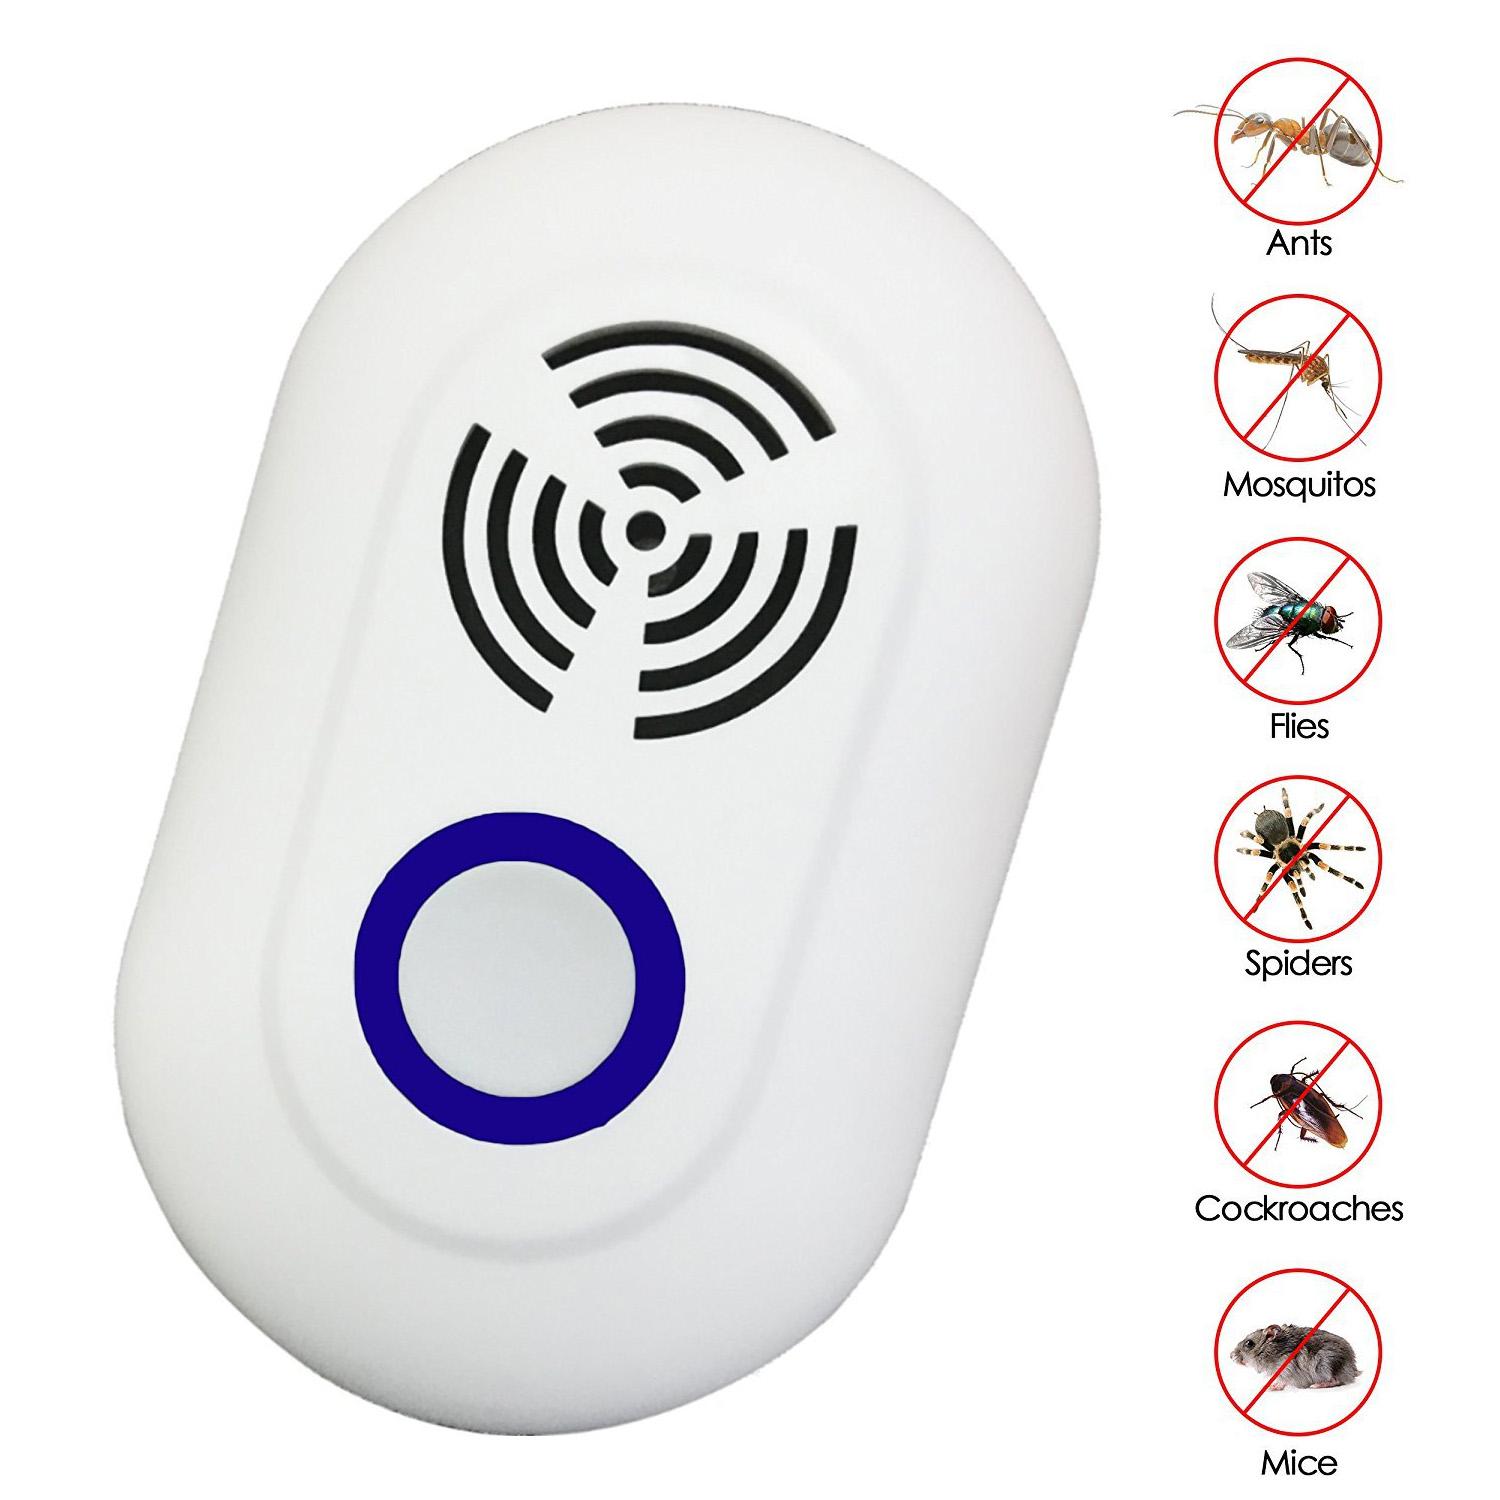 4pcs Electronic Ultrasonic Pest Control Repeller in Insect Repellent for Mouse Mosquito Cockroach Cricket Bugs UK Plug - intl